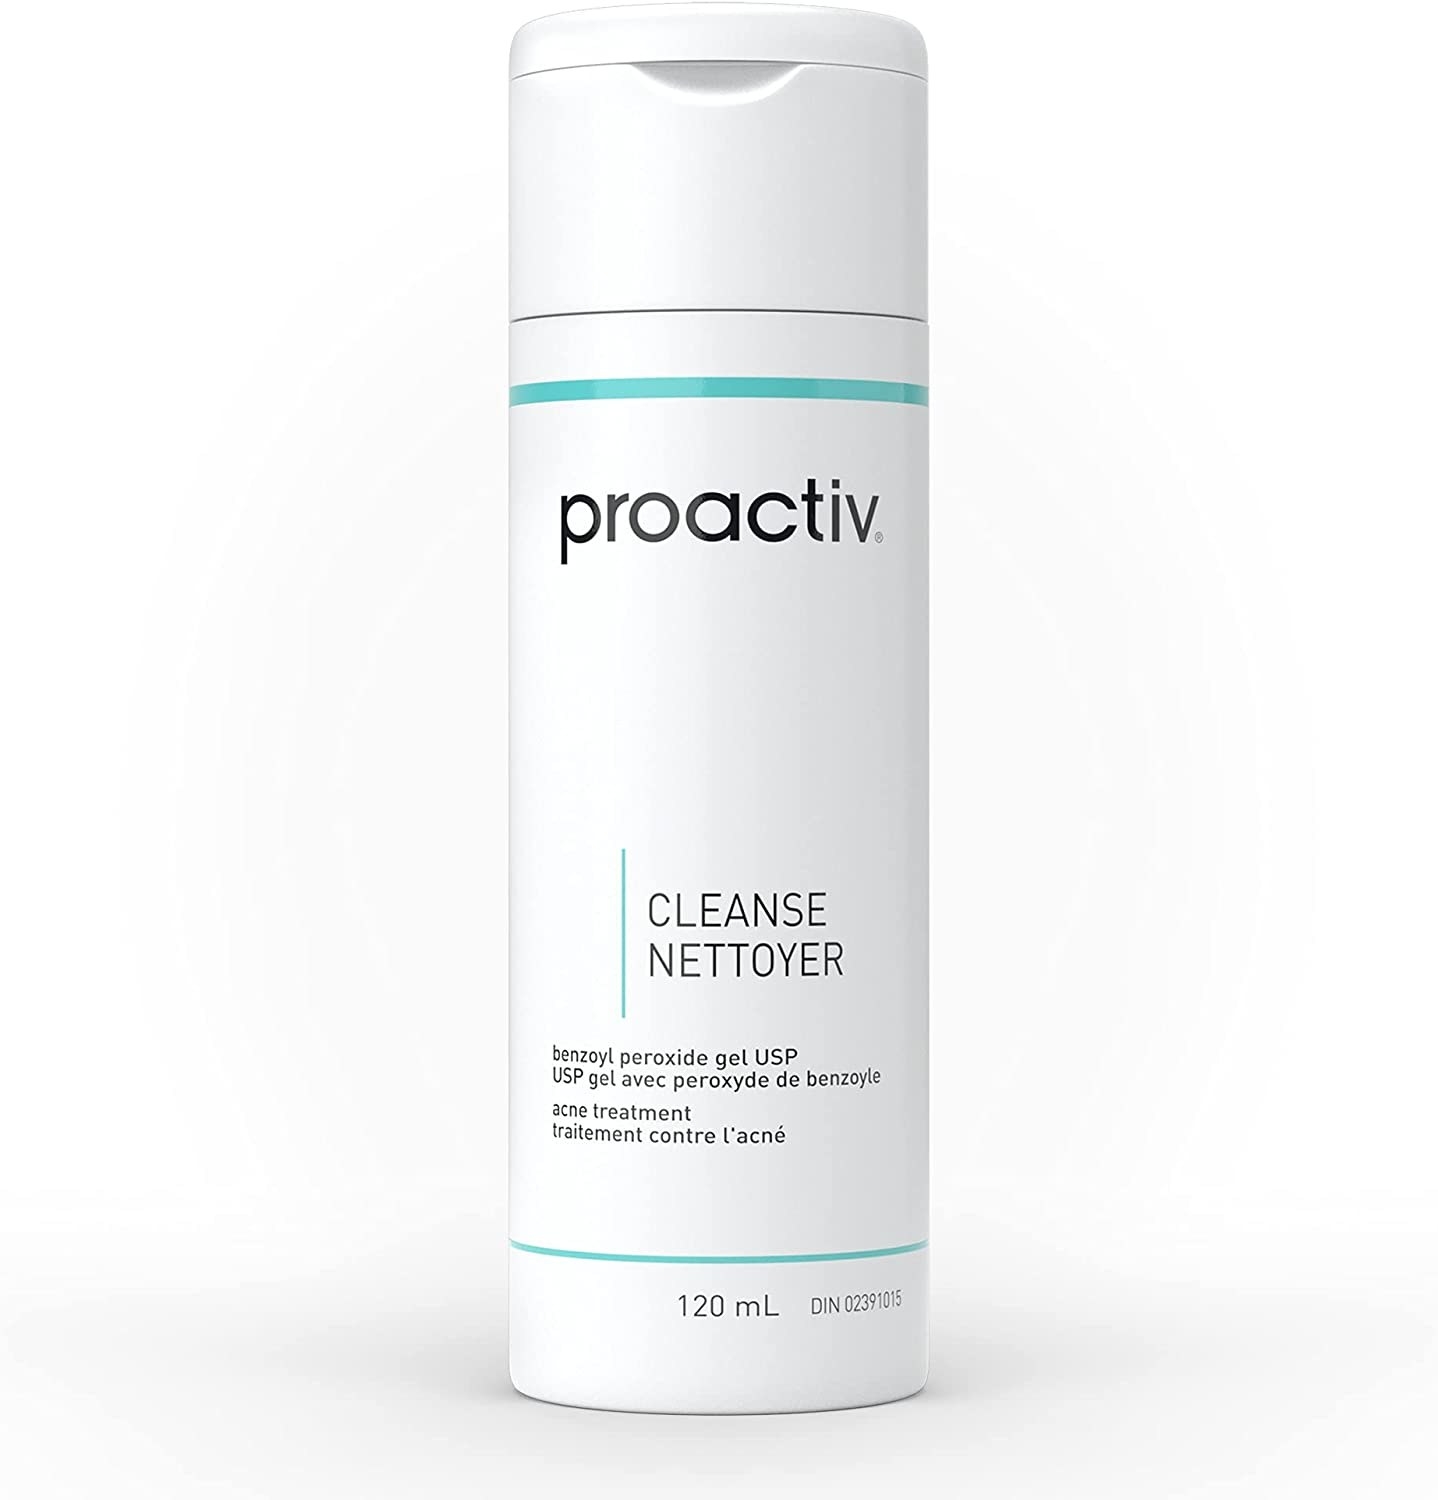 The bottle of cleanser on a blank background